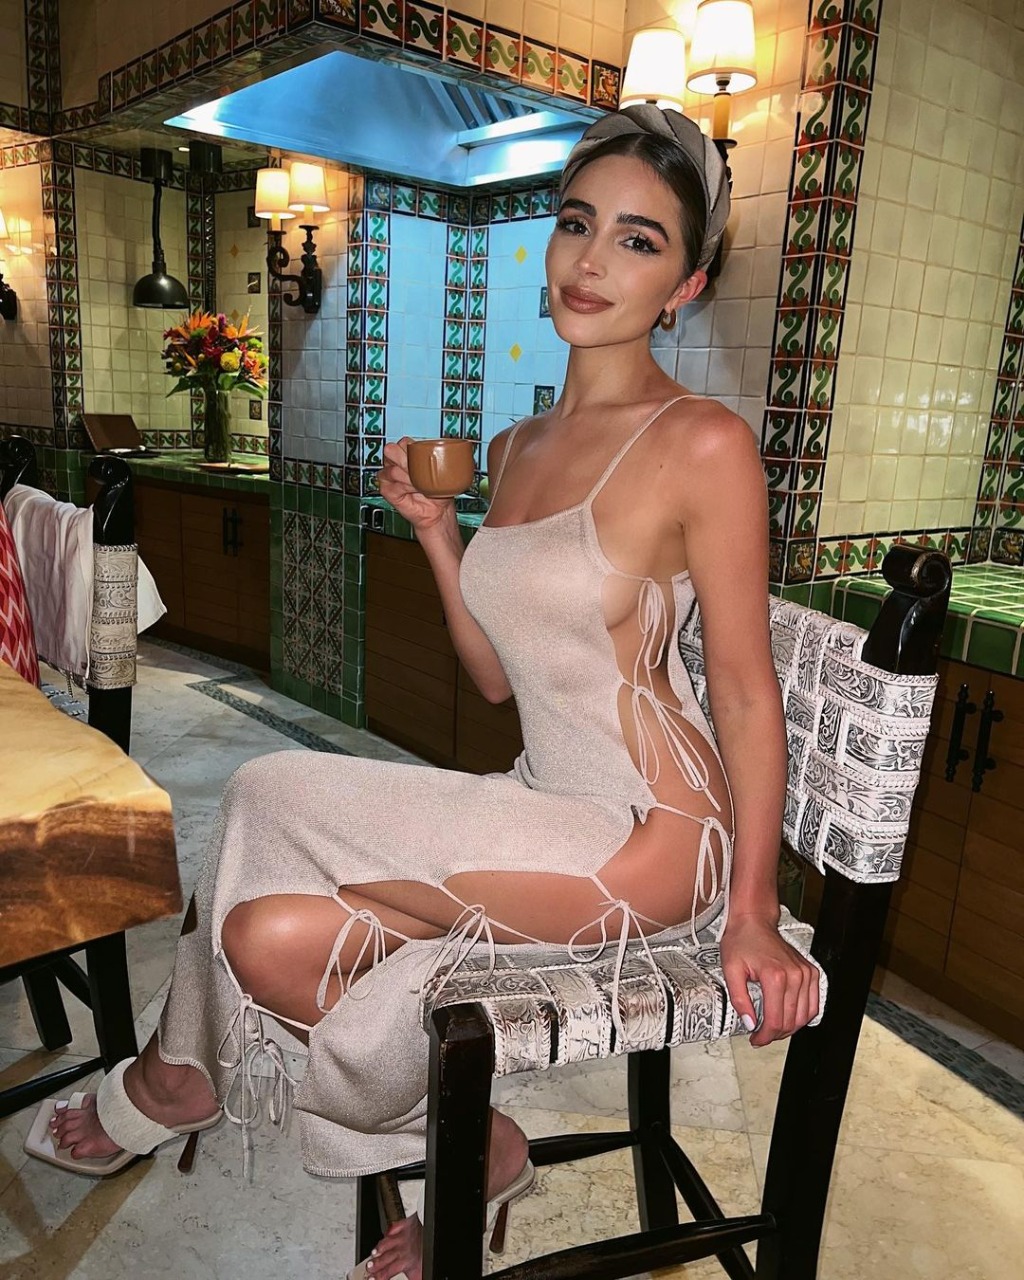 Olivia Frances Culpo Latest Mexico Vacation Images Goes Viral on Social Media